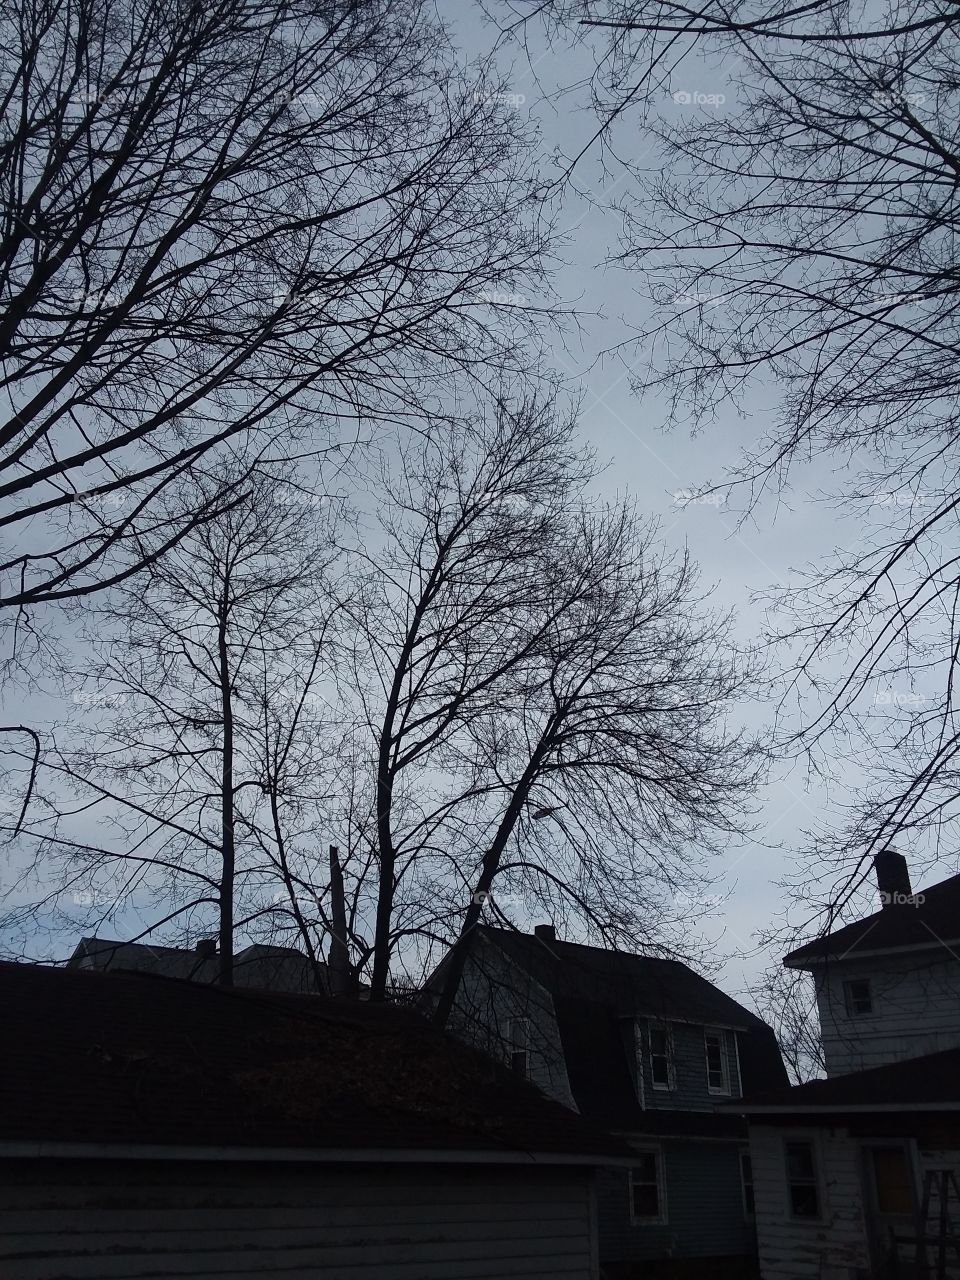 trees
houses 
sky
bare branches
dark